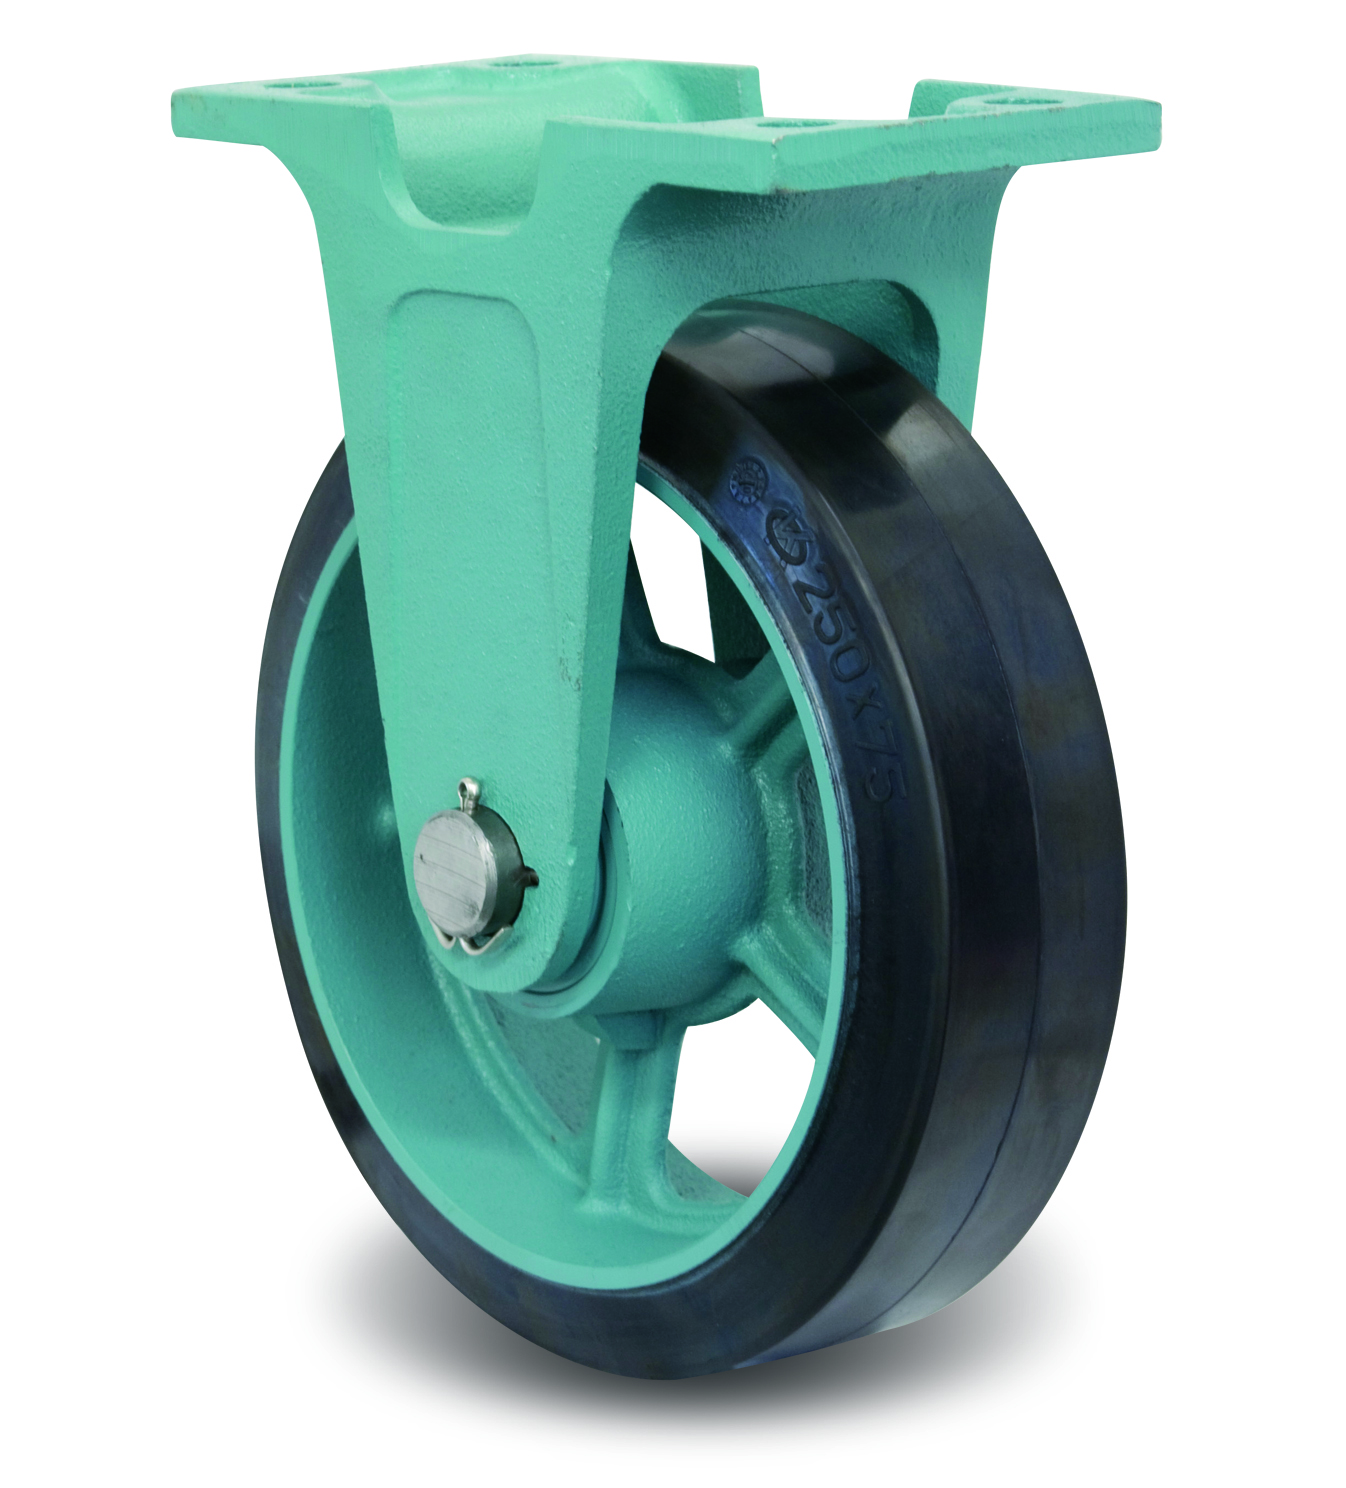 Casters - Wide Type Ductile Steel Fixed Plate Rubber, MG-W, E/MG-W Series.